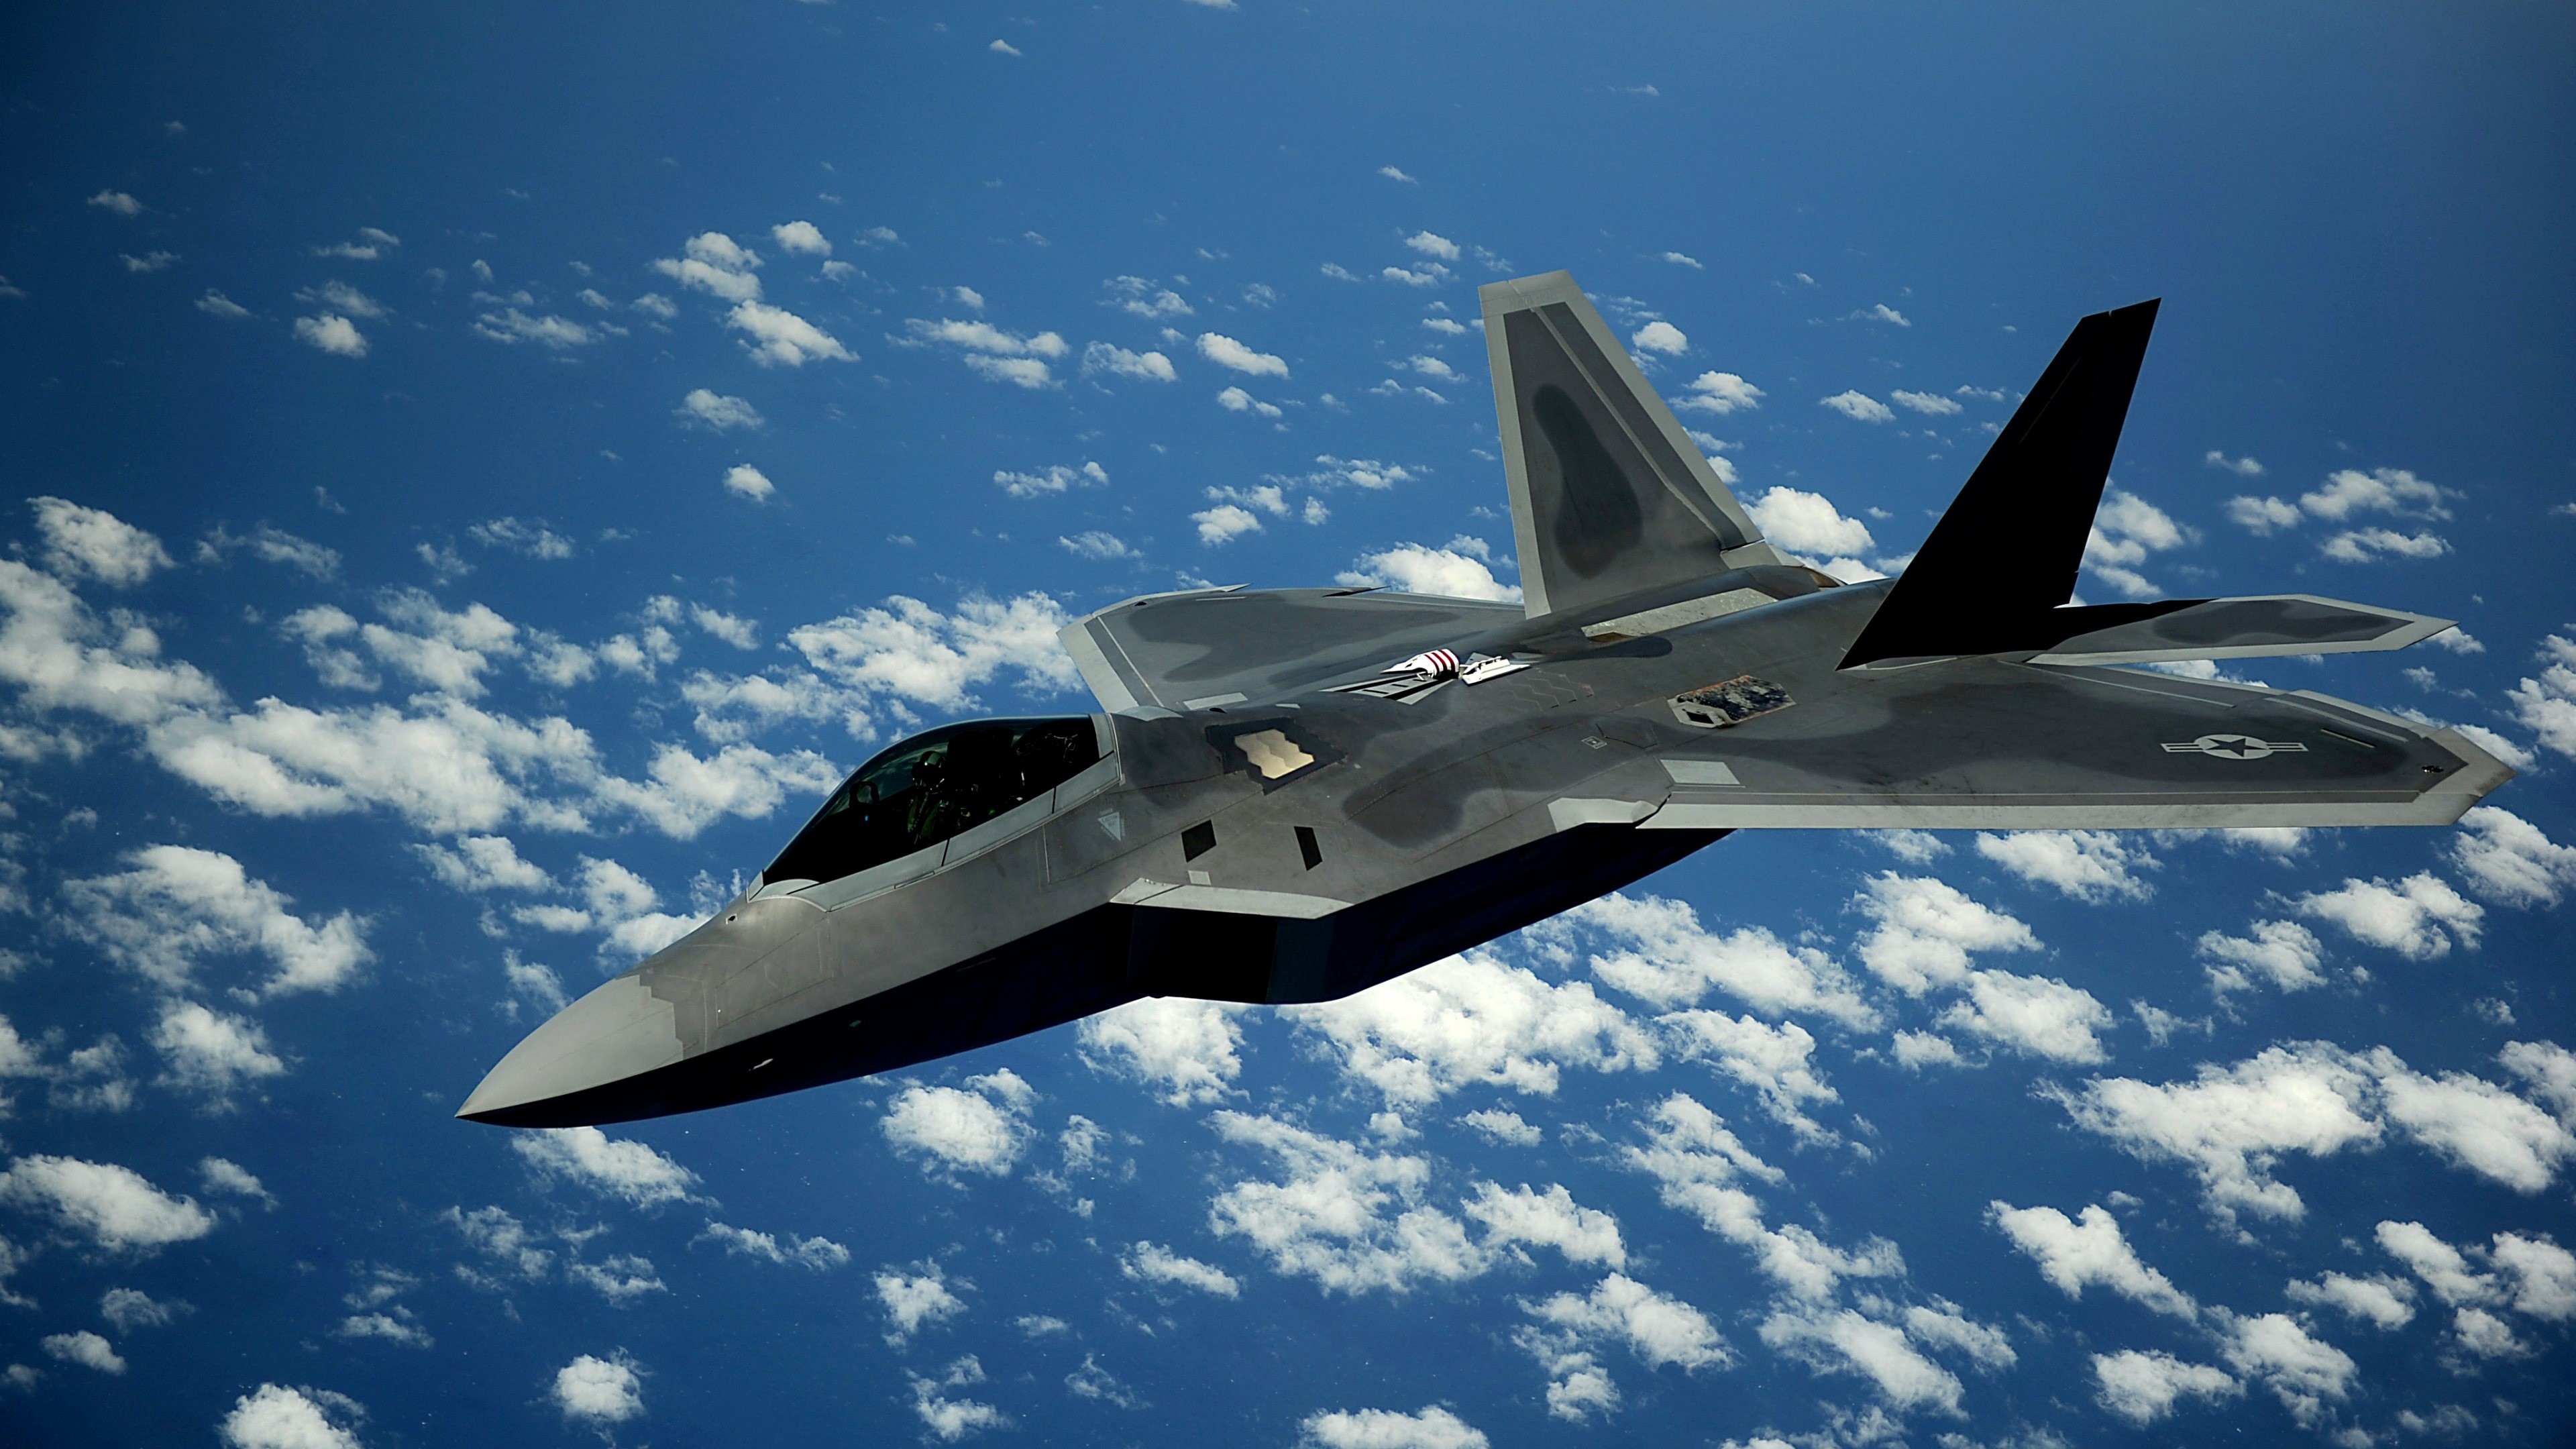 Stealth Fighter Wallpaper (72+ pictures)